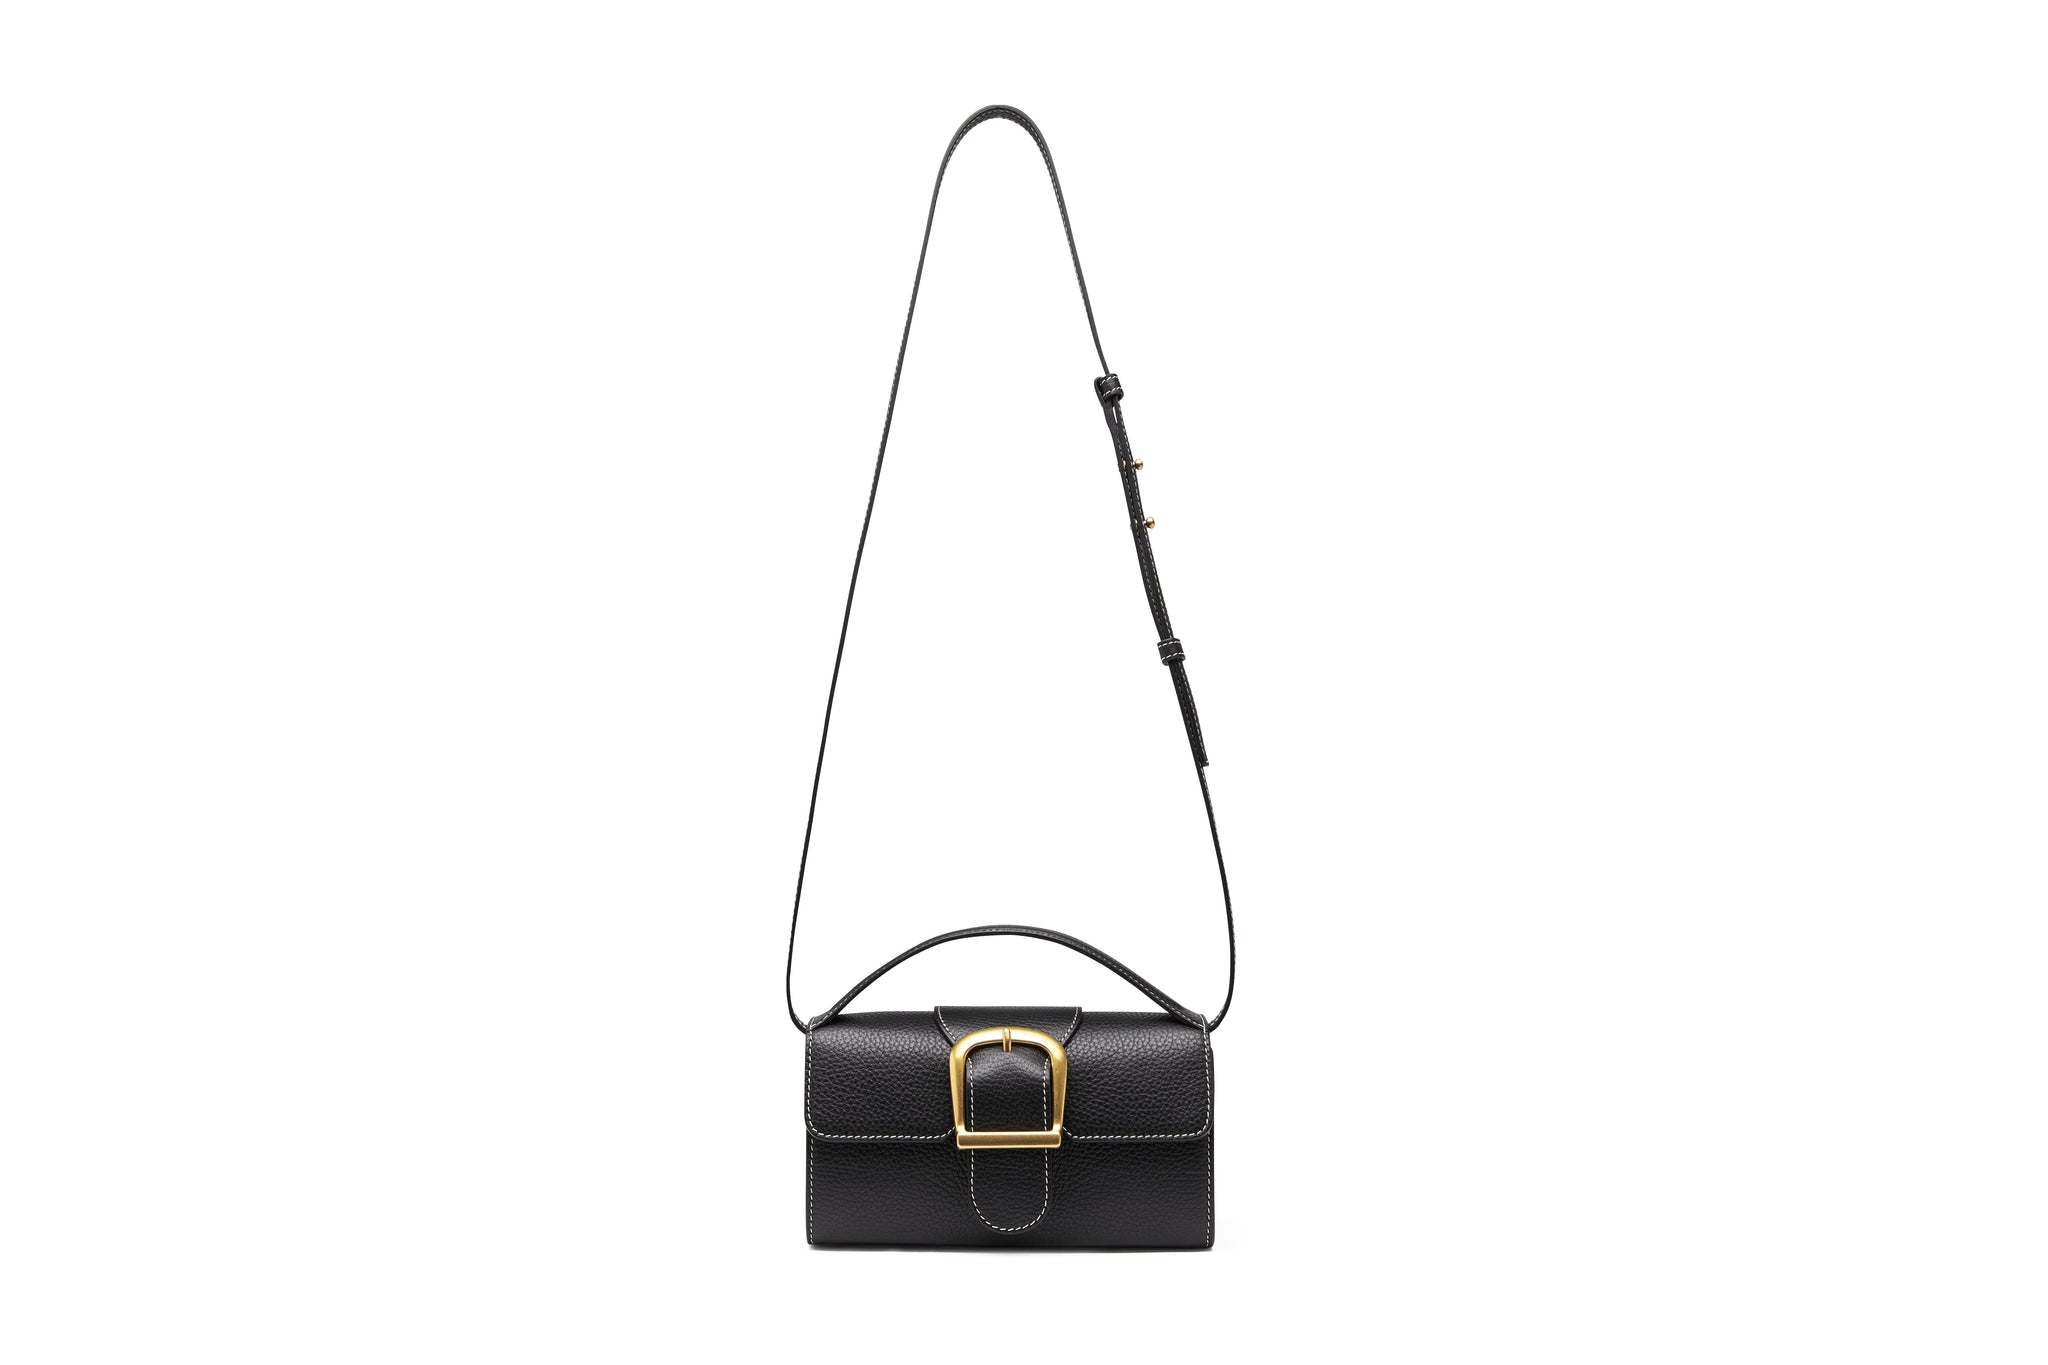 Rylan, Rylan Studio, Black with Ivory Stitch Soft Grained Mini Satchel with Flat Handle, Made in Italy